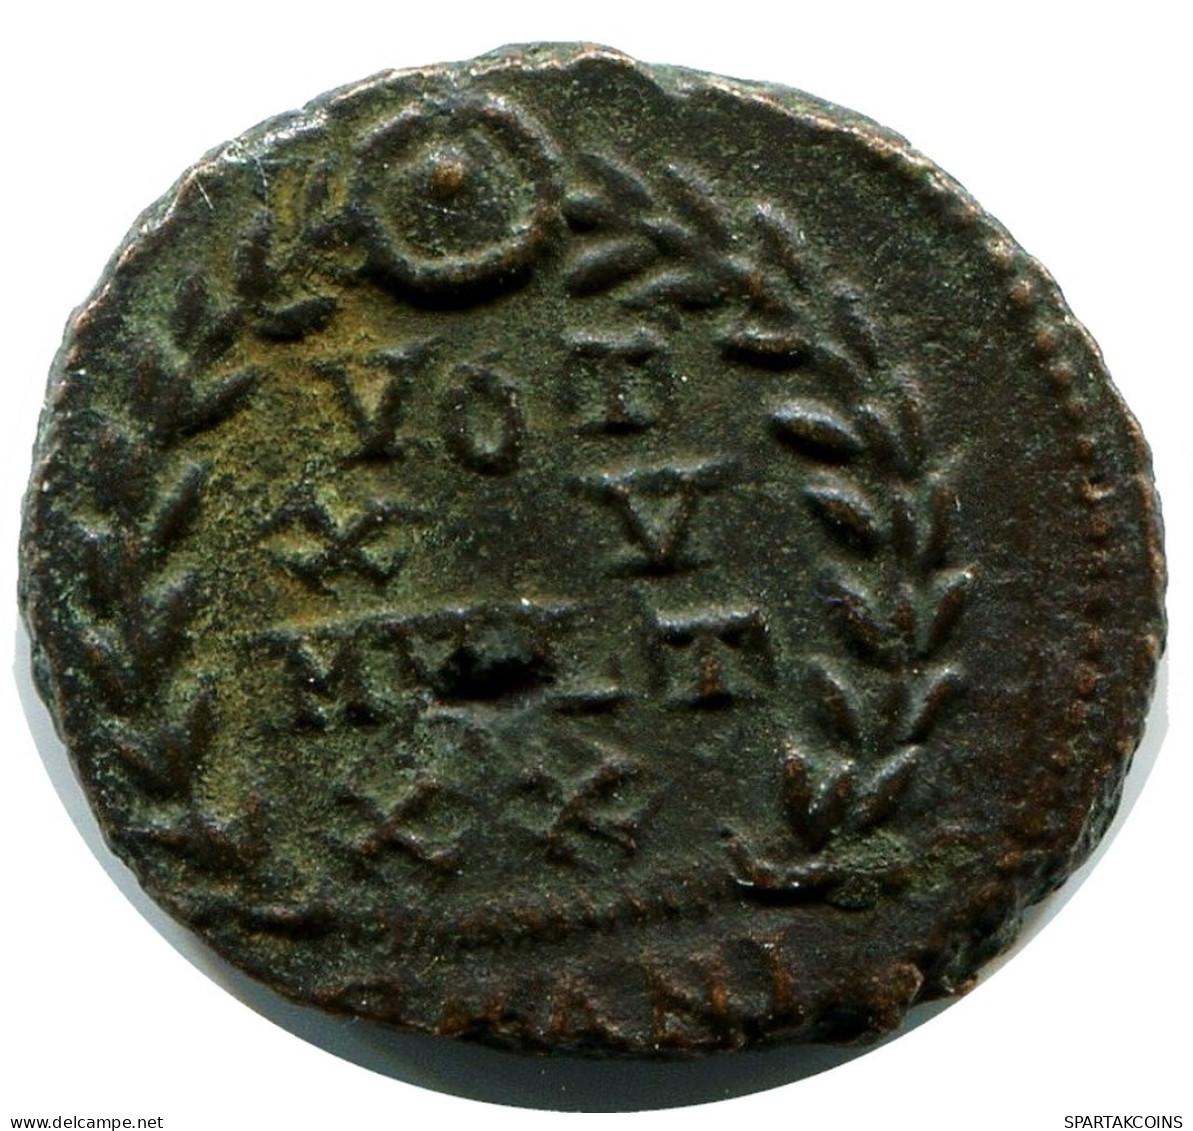 CONSTANS MINTED IN ANTIOCH FOUND IN IHNASYAH HOARD EGYPT #ANC11821.14.F.A - L'Empire Chrétien (307 à 363)